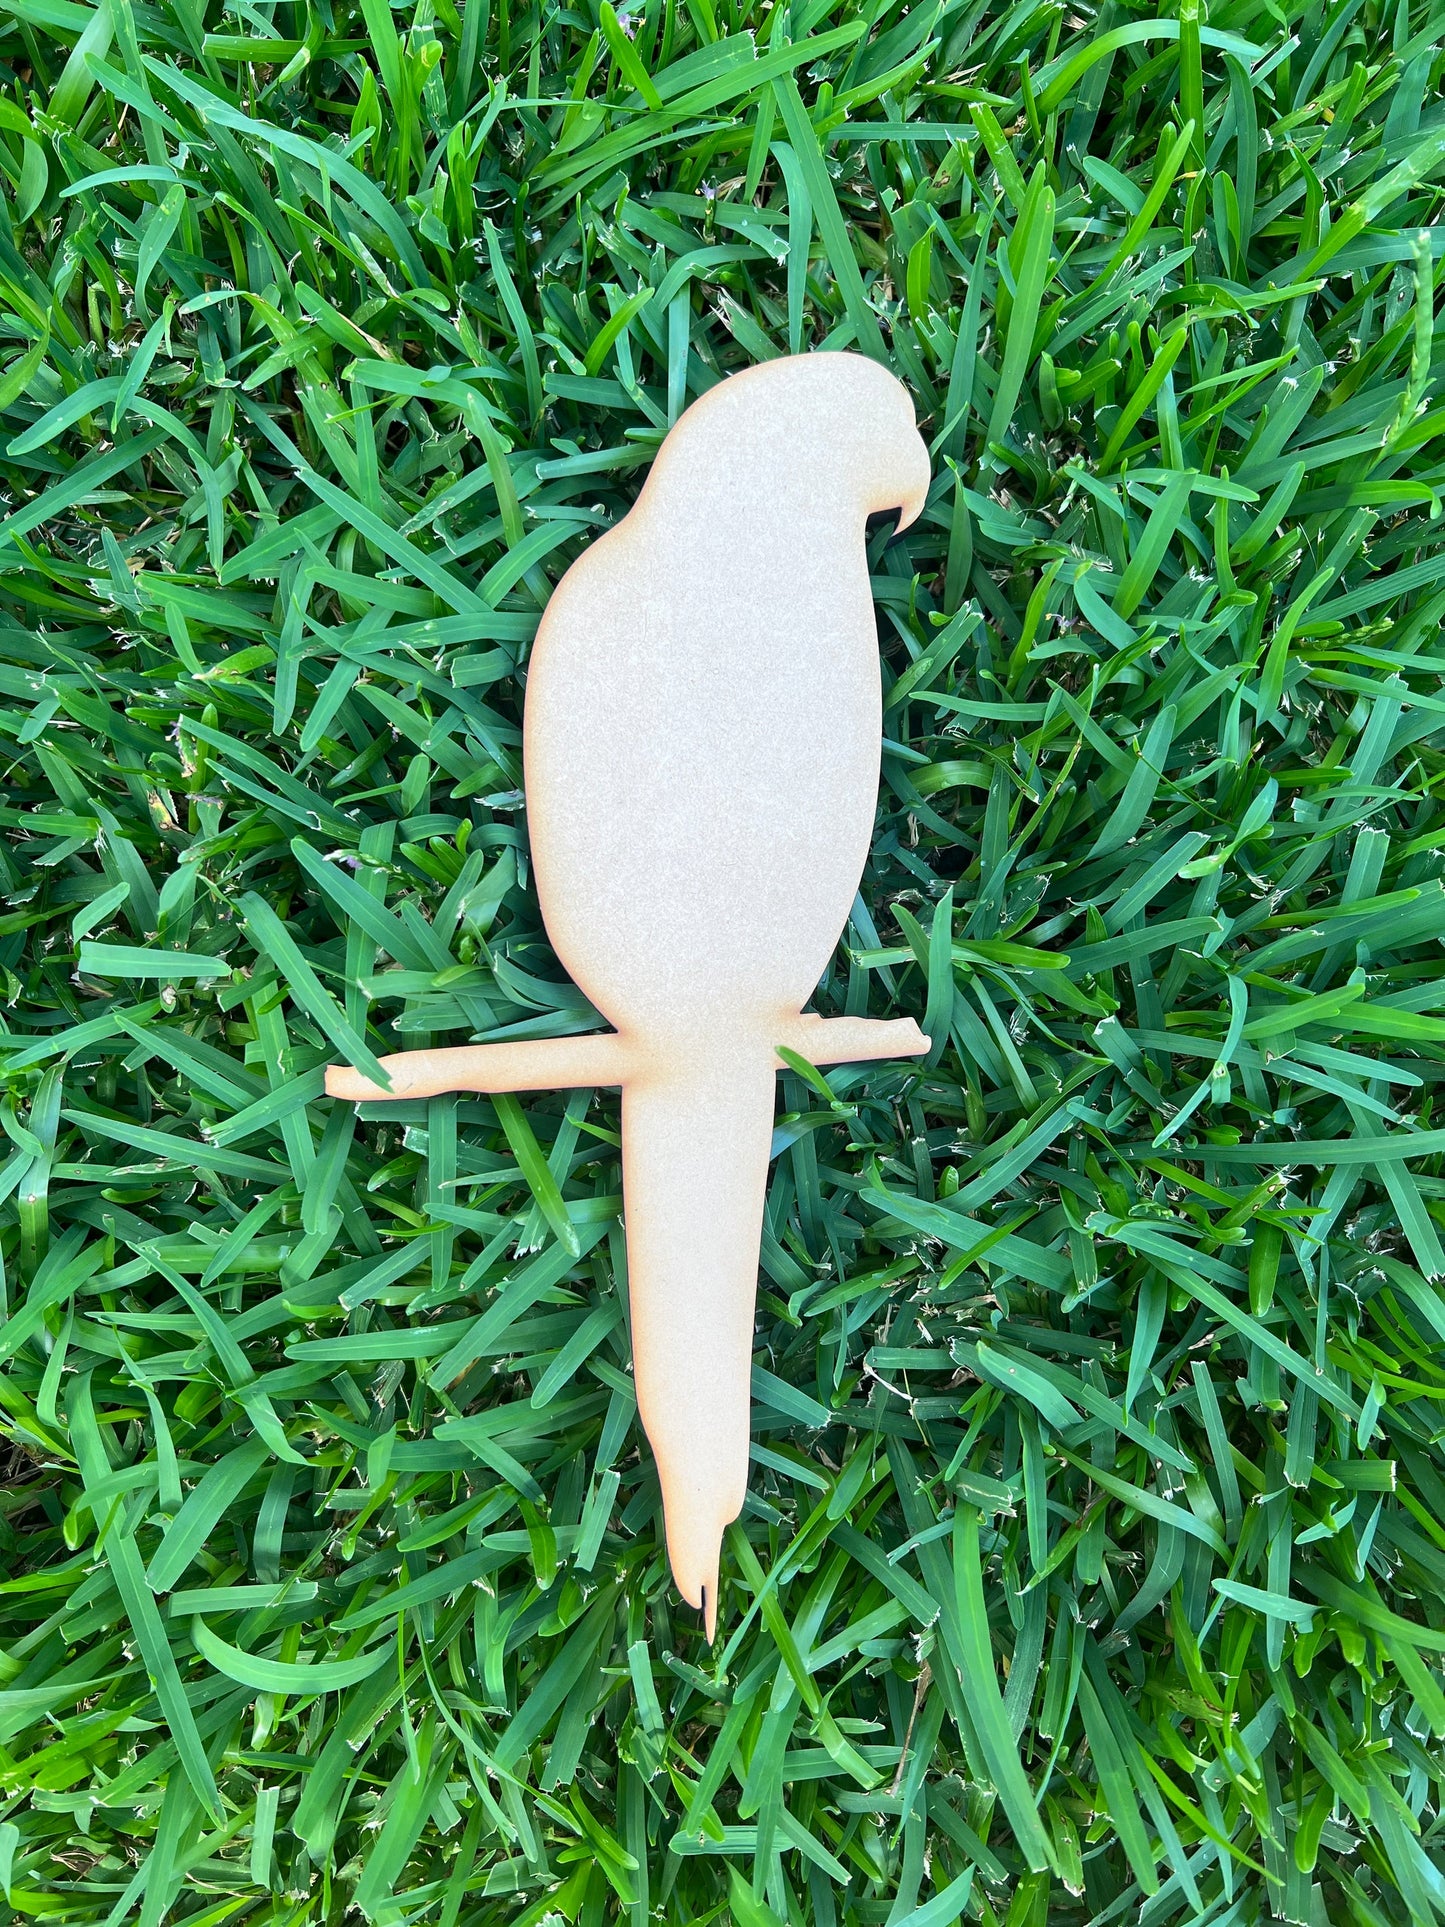 Parrot on Perch Shape MDF Art Board, Resin Board, Art Blank, Craft Blank ~3mm/6mm/9mm thickness available~